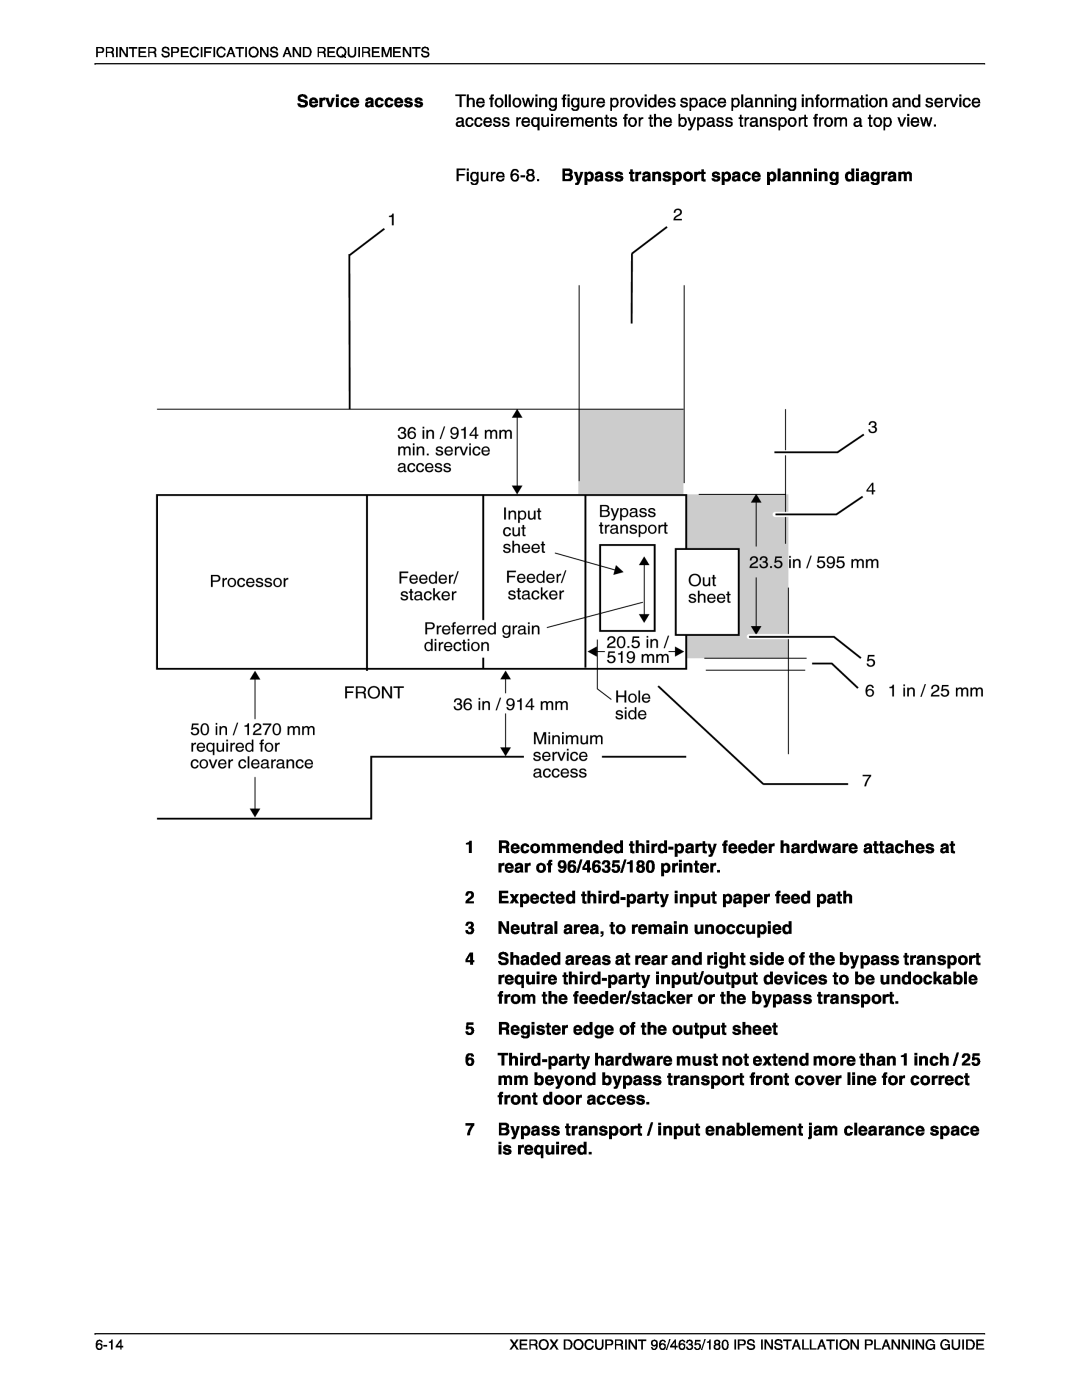 Xerox 180 IPS manual 2Expected third-partyinput paper feed path, 3Neutral area, to remain unoccupied 